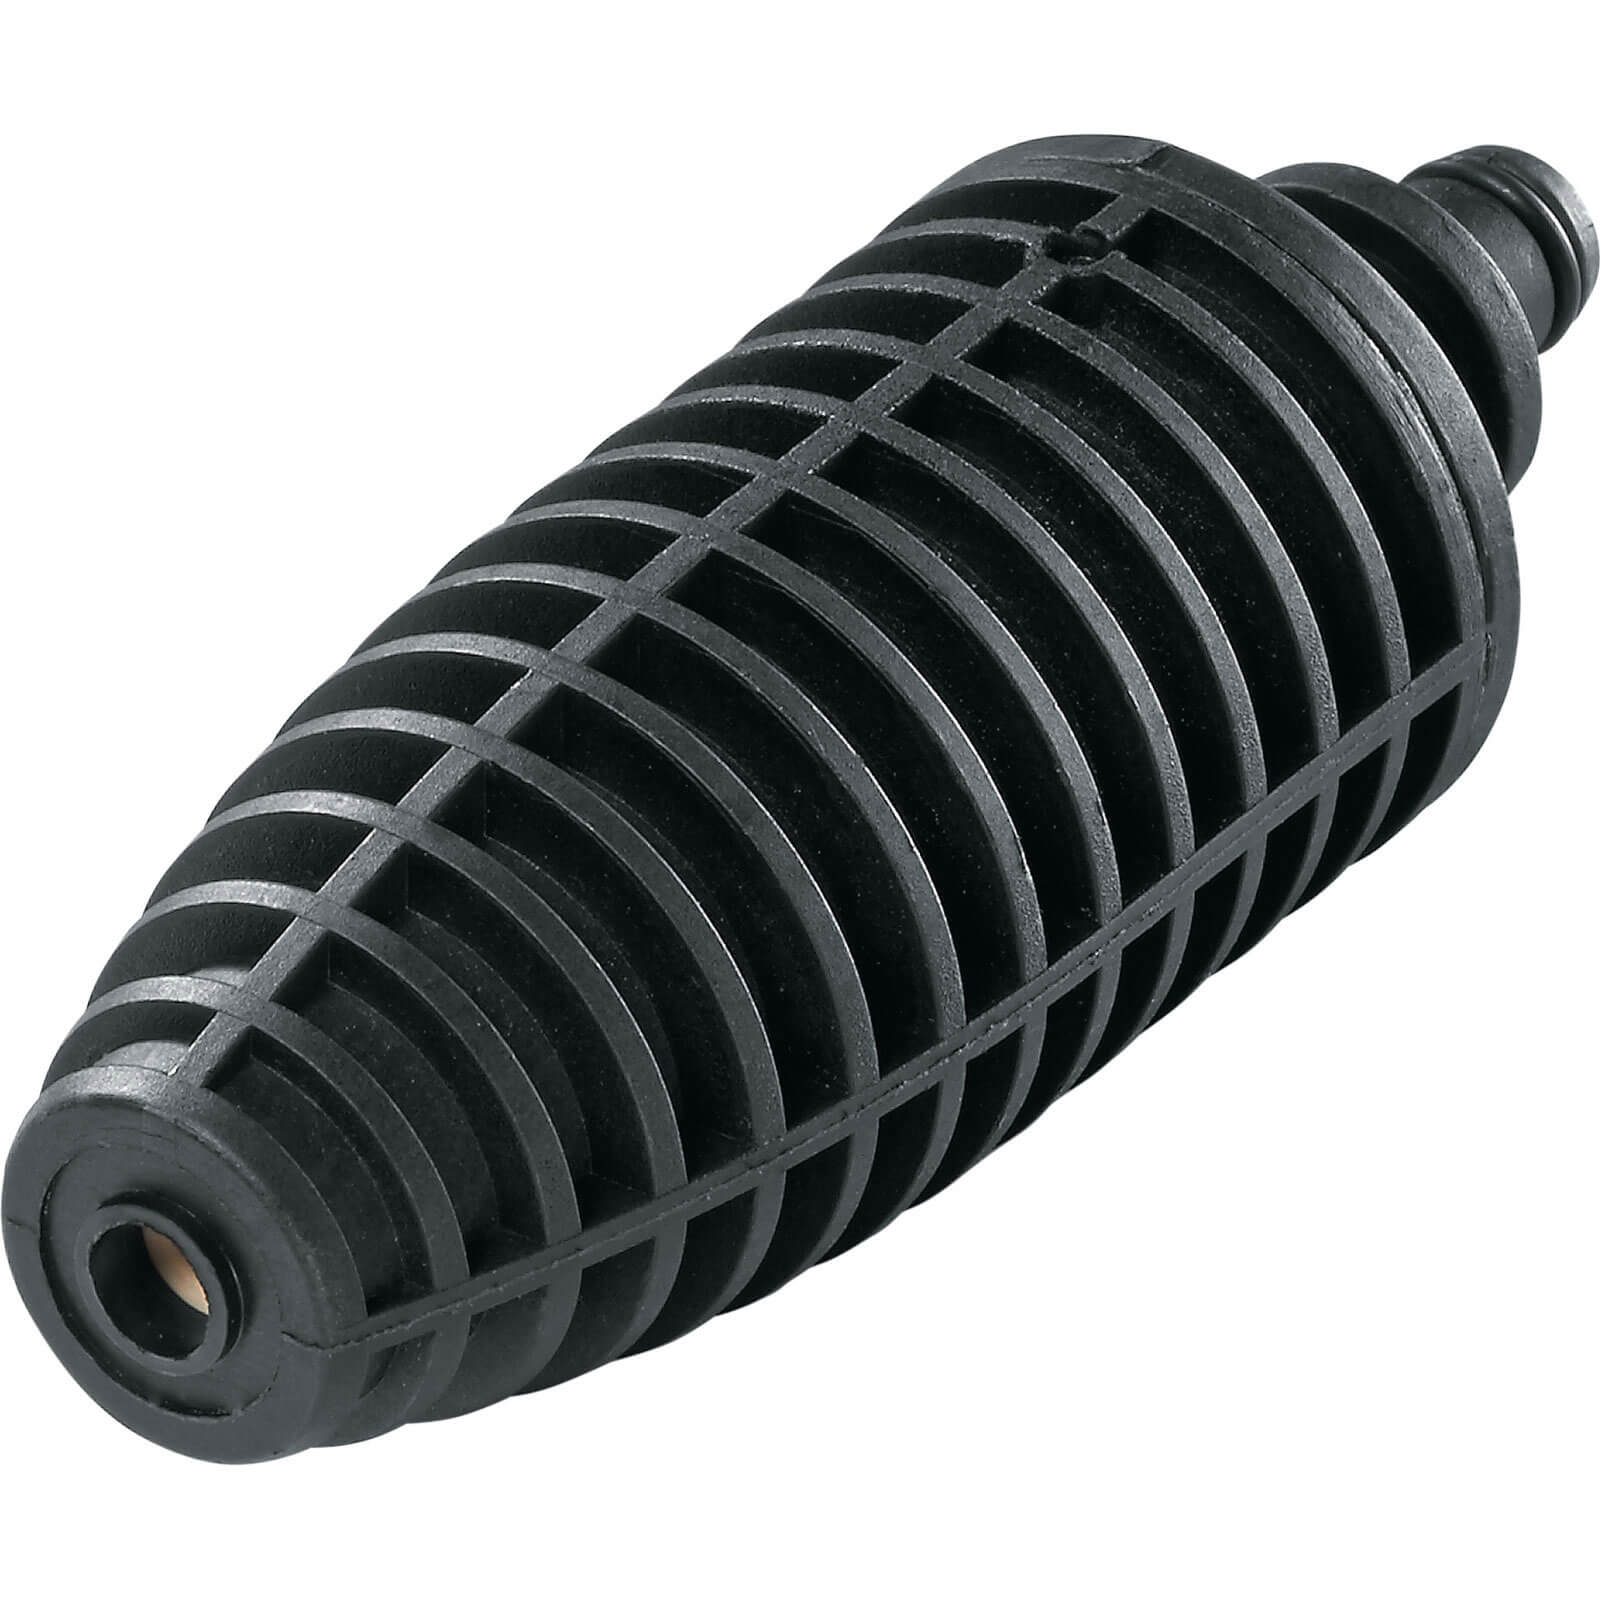 Bosch Rotary Nozzle for AQT Pressure Washers